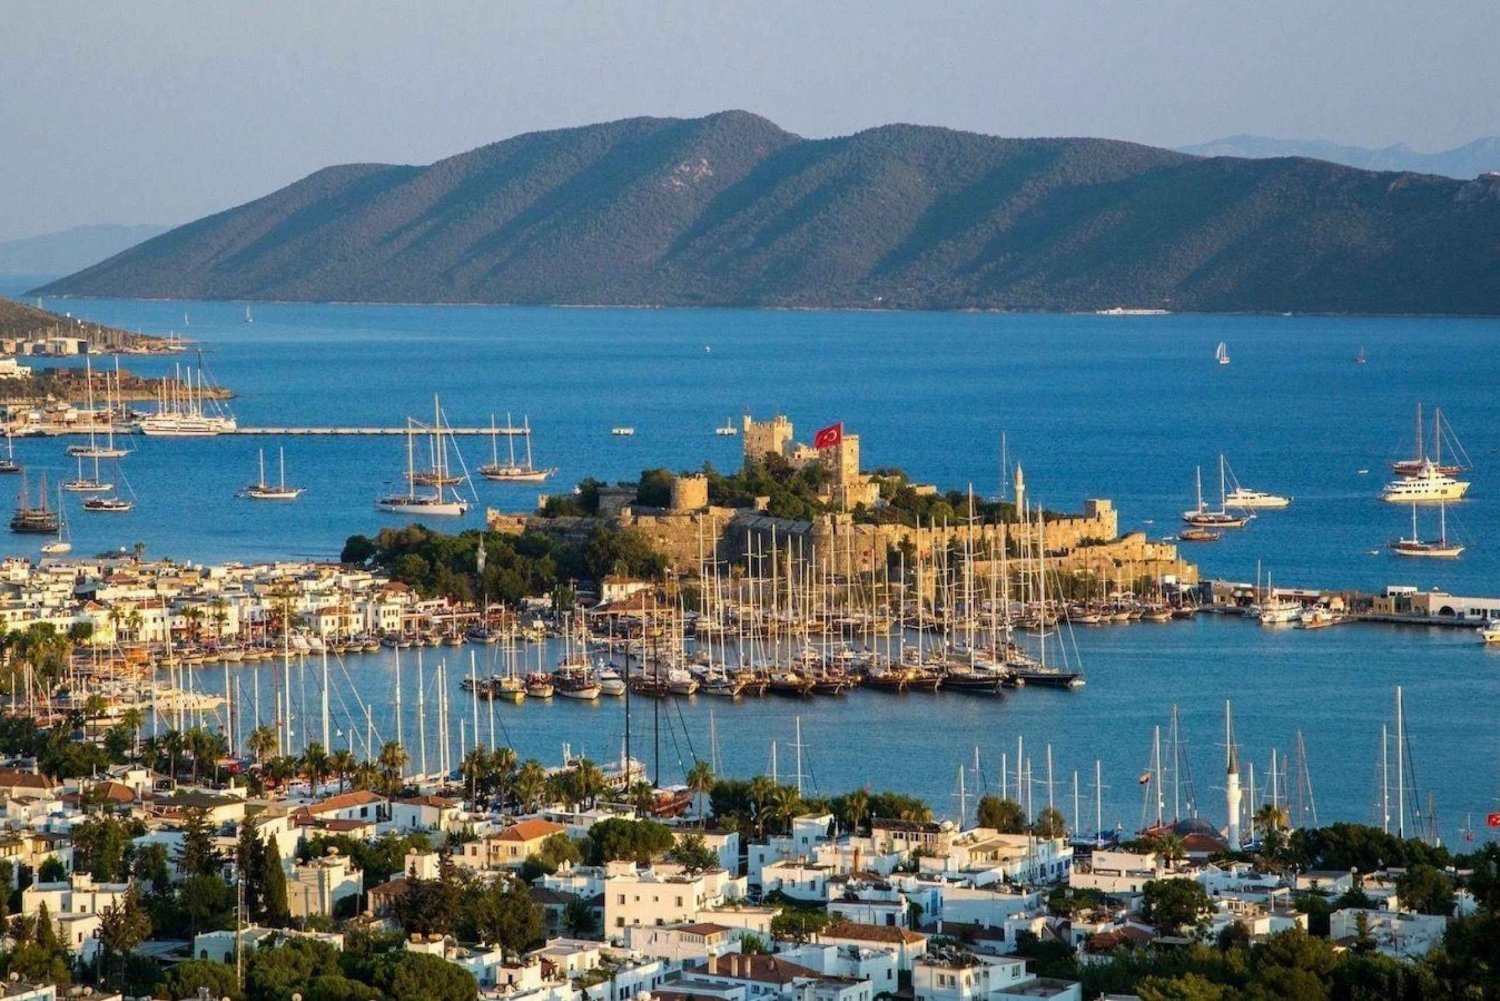 Explore Bodrum: Shop, Sightsee, and Soak in the Charm!